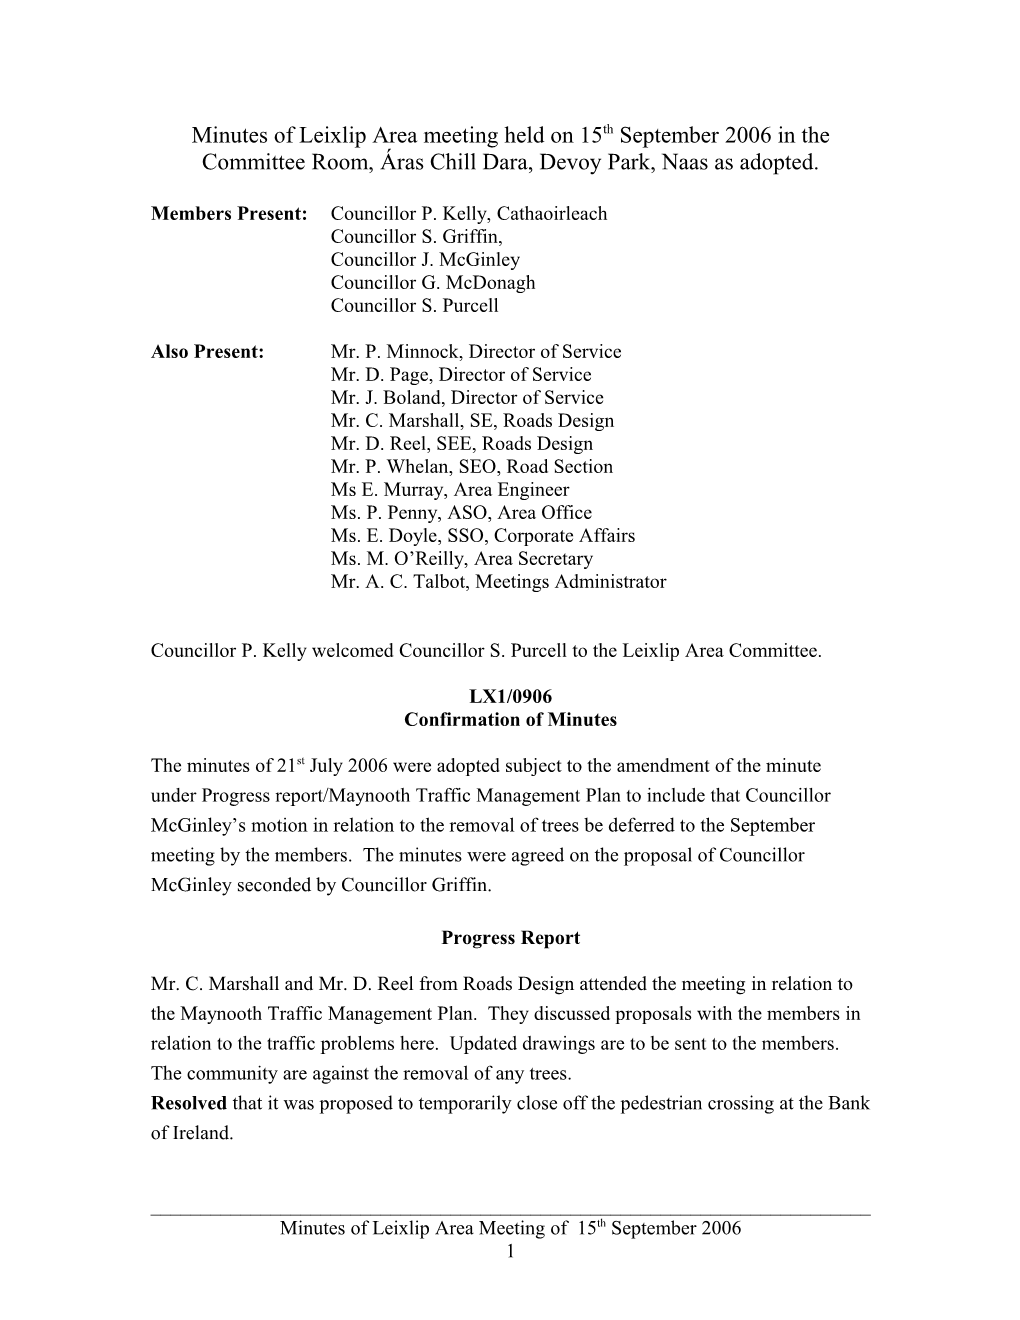 Draft Minutes of Leixlip Area Meeting Held on 15Th September 2006 in the Committee Room